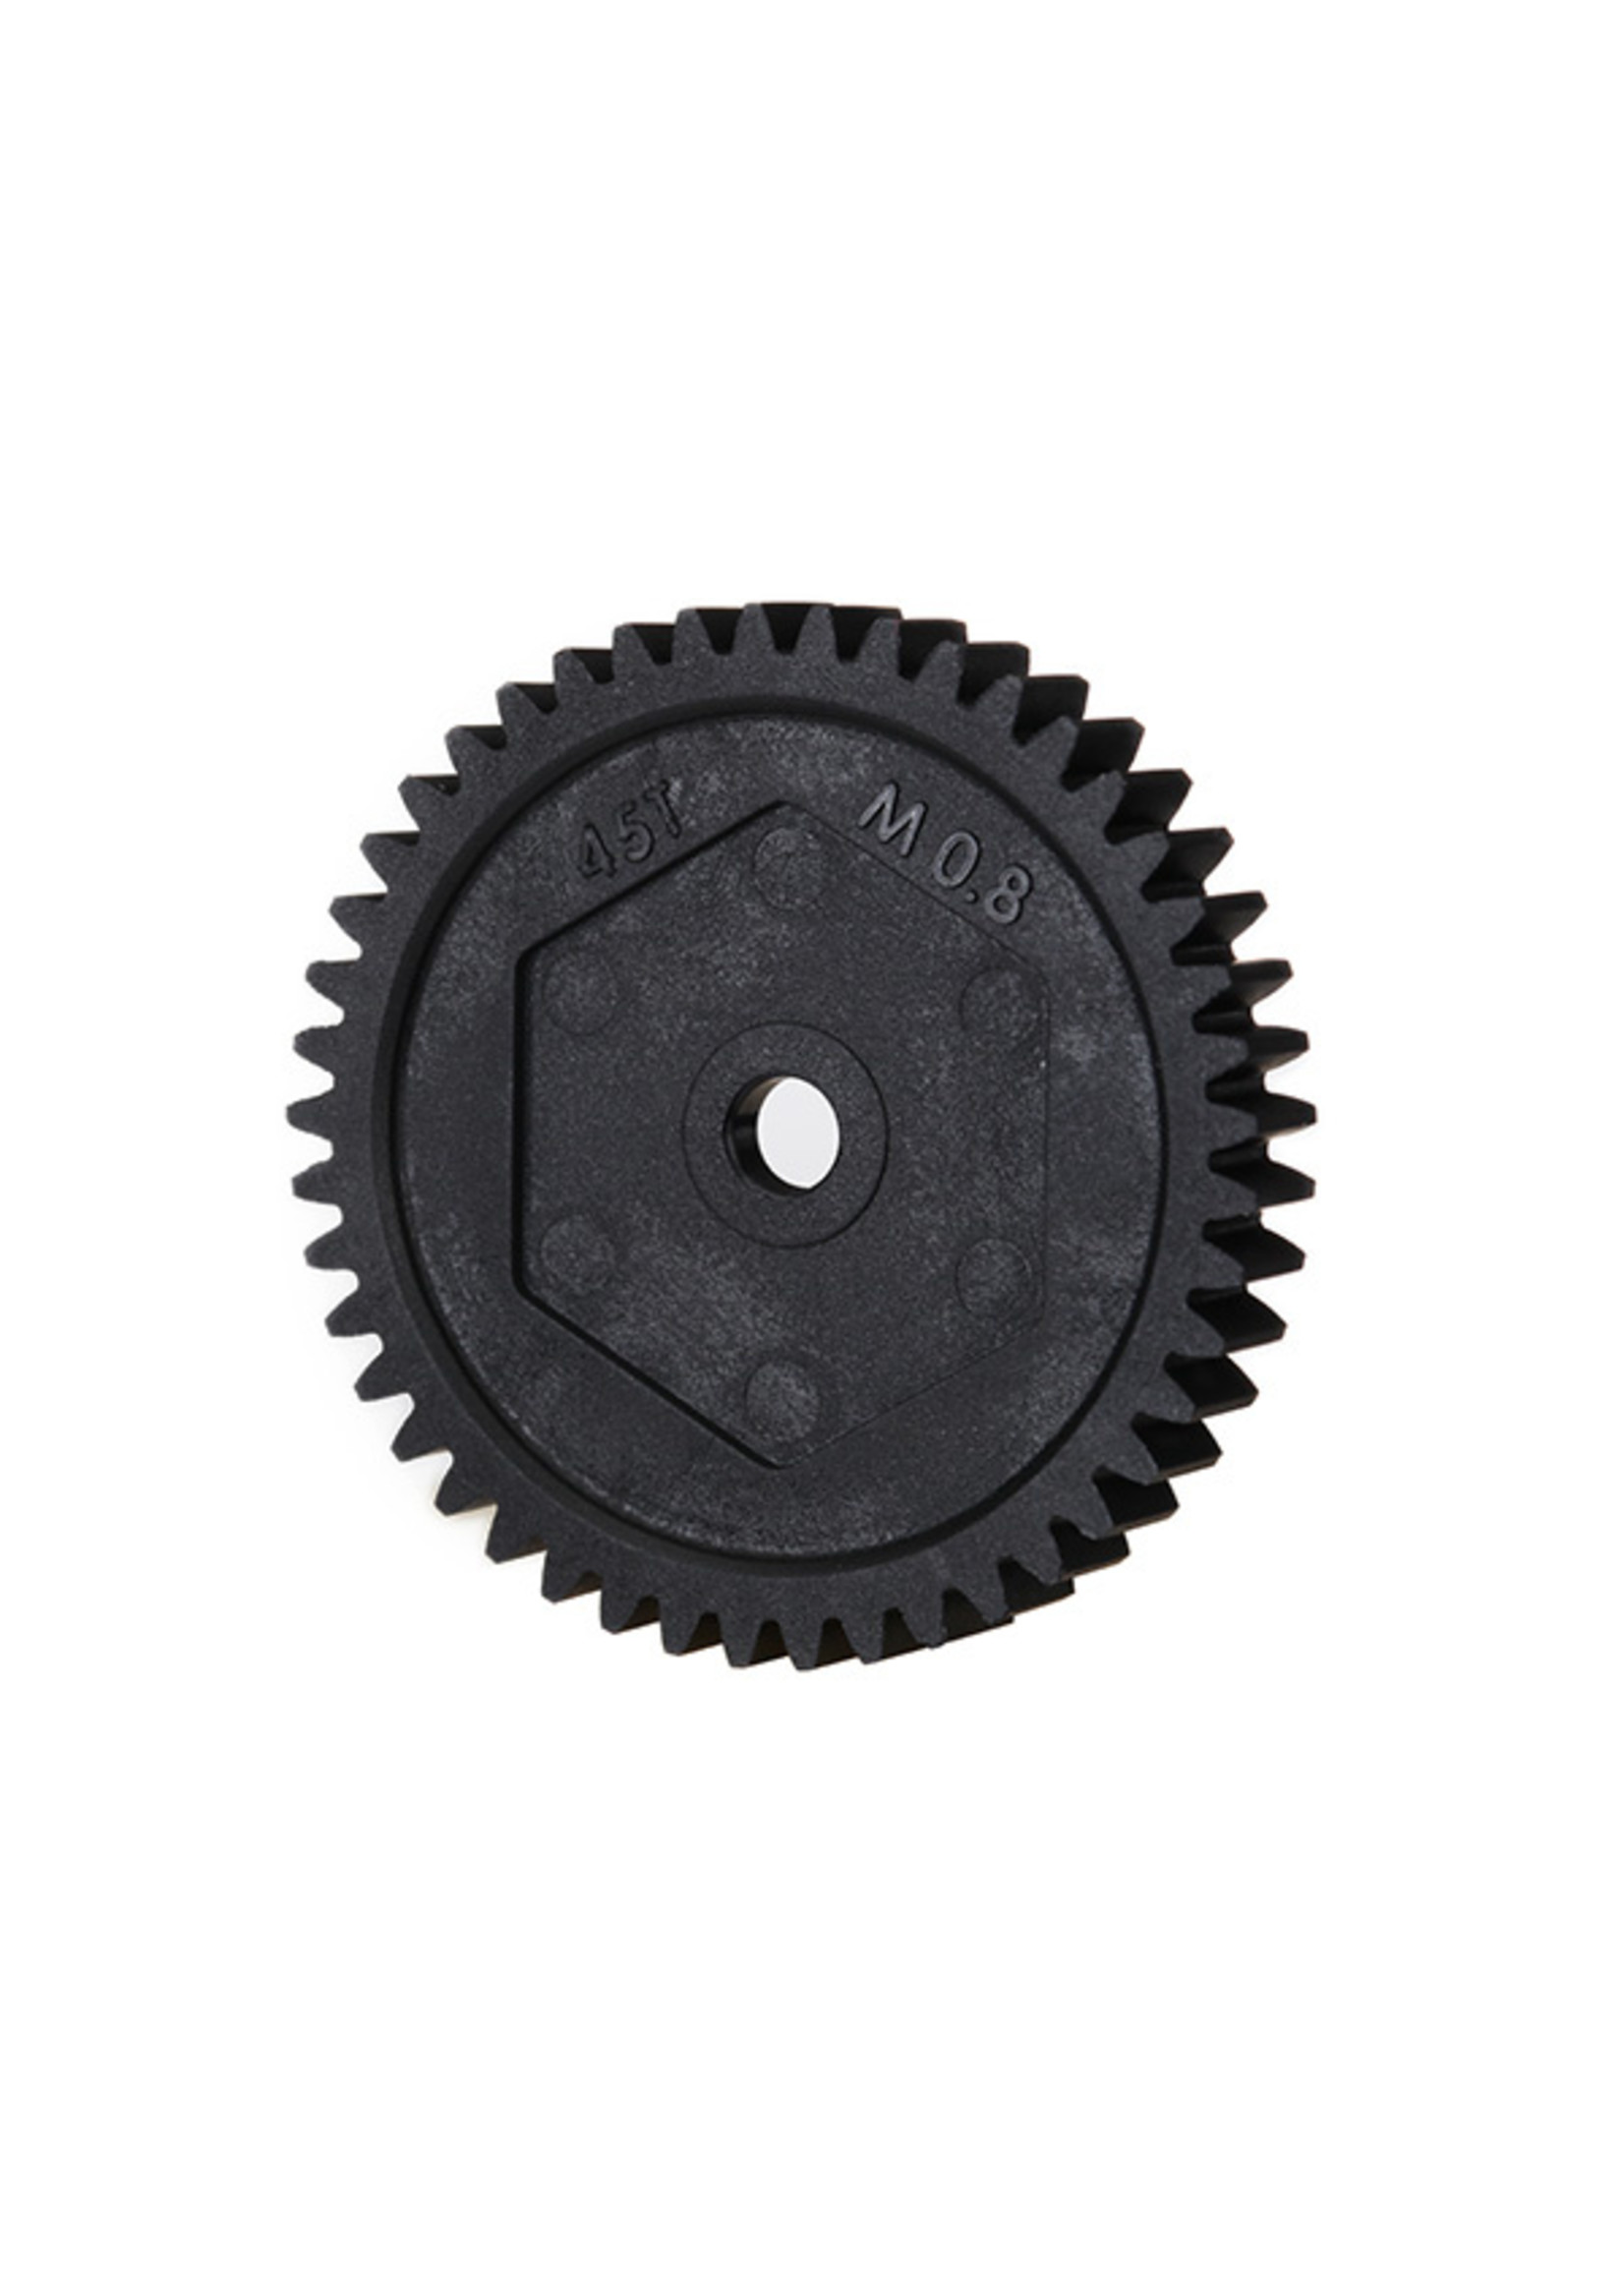 Traxxas 8053 - Spur Gear 45T 32-Pitch for TRX-4